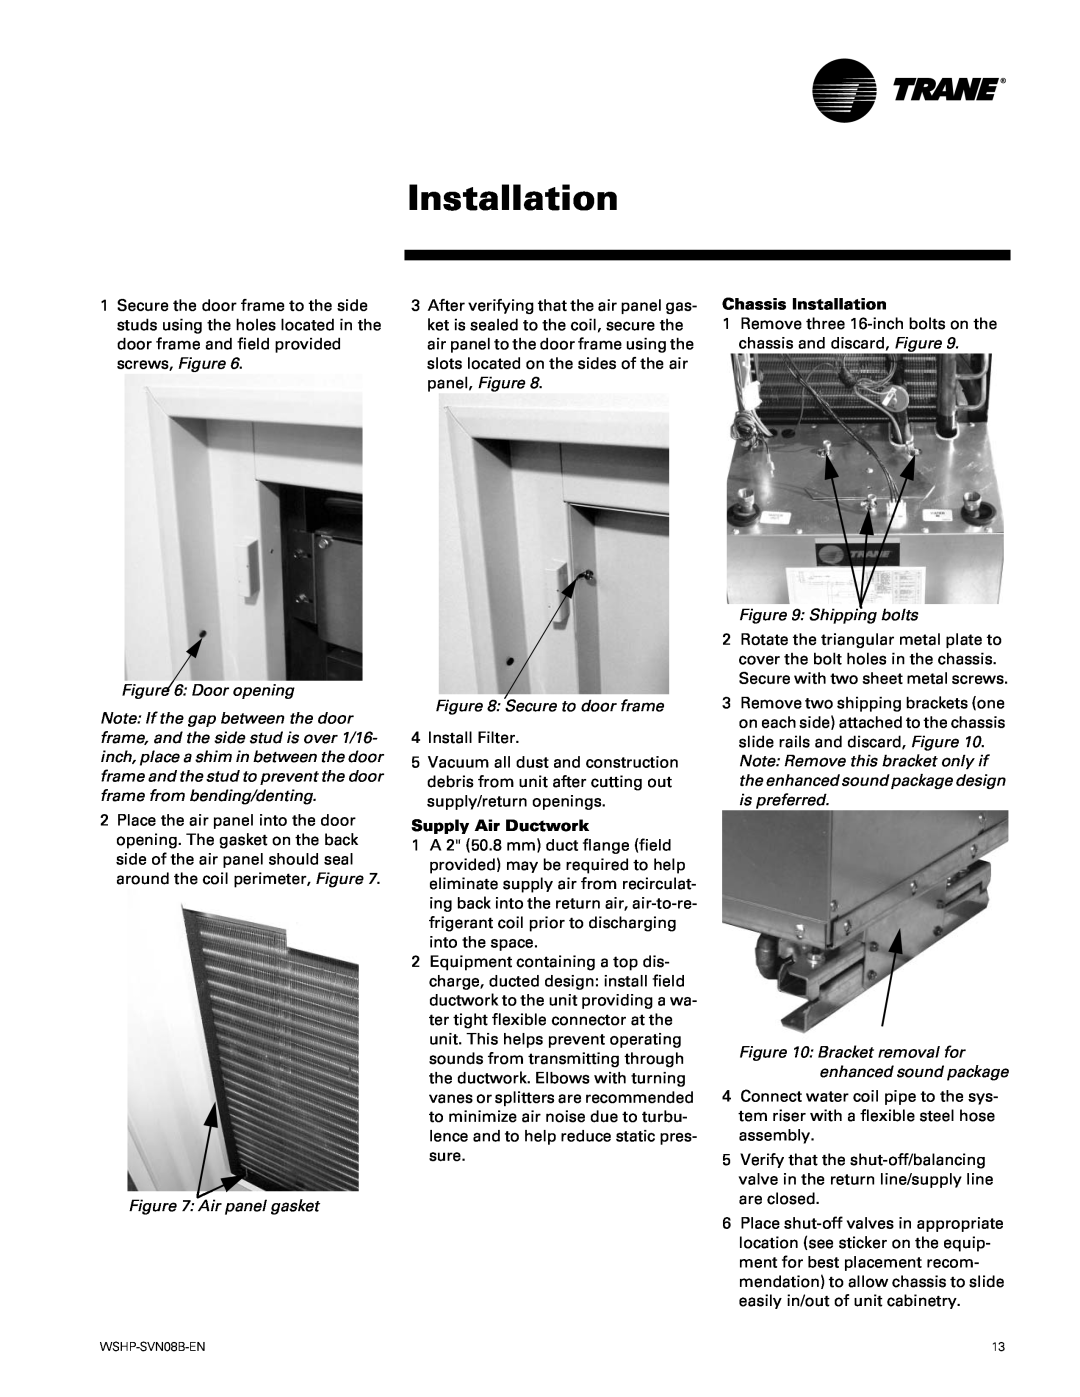 Trane GETB manual Door opening, Air panel gasket, Secure to door frame, Supply Air Ductwork, Chassis Installation 